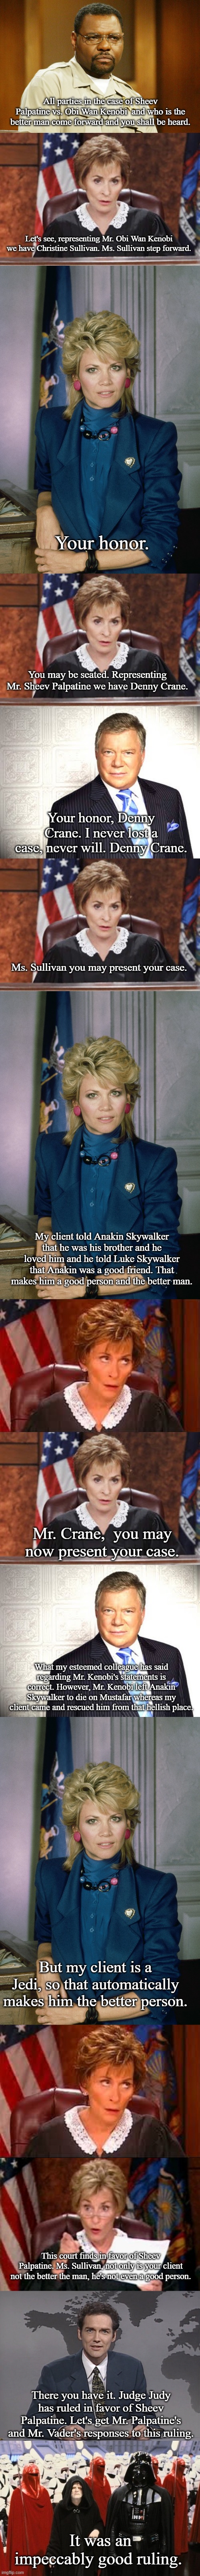 The Case of Sheev Palpatine vs. Obi Wan Kenobi and who is the better man | All parties in the case of Sheev Palpatine vs. Obi Wan Kenobi  and who is the better man come forward and you shall be heard. Let's see, representing Mr. Obi Wan Kenobi we have Christine Sullivan. Ms. Sullivan step forward. Your honor. You may be seated. Representing Mr. Sheev Palpatine we have Denny Crane. Your honor, Denny Crane. I never lost a case, never will. Denny Crane. Ms. Sullivan you may present your case. My client told Anakin Skywalker that he was his brother and he loved him and he told Luke Skywalker that Anakin was a good friend. That makes him a good person and the better man. Mr. Crane,  you may now present your case. What my esteemed colleague has said regarding Mr. Kenobi's statements is correct. However, Mr. Kenobi left Anakin Skywalker to die on Mustafar whereas my client came and rescued him from that hellish place. But my client is a Jedi, so that automatically makes him the better person. This court finds in favor of Sheev Palpatine. Ms. Sullivan, not only is your client not the better the man, he's not even a good person. There you have it. Judge Judy has ruled in favor of Sheev Palpatine. Let's get Mr. Palpatine's and Mr. Vader's responses to this ruling. It was an impeccably good ruling. | image tagged in judge judy,denny crane,judge judy eye roll,norm mcdonald,star wars,funny | made w/ Imgflip meme maker